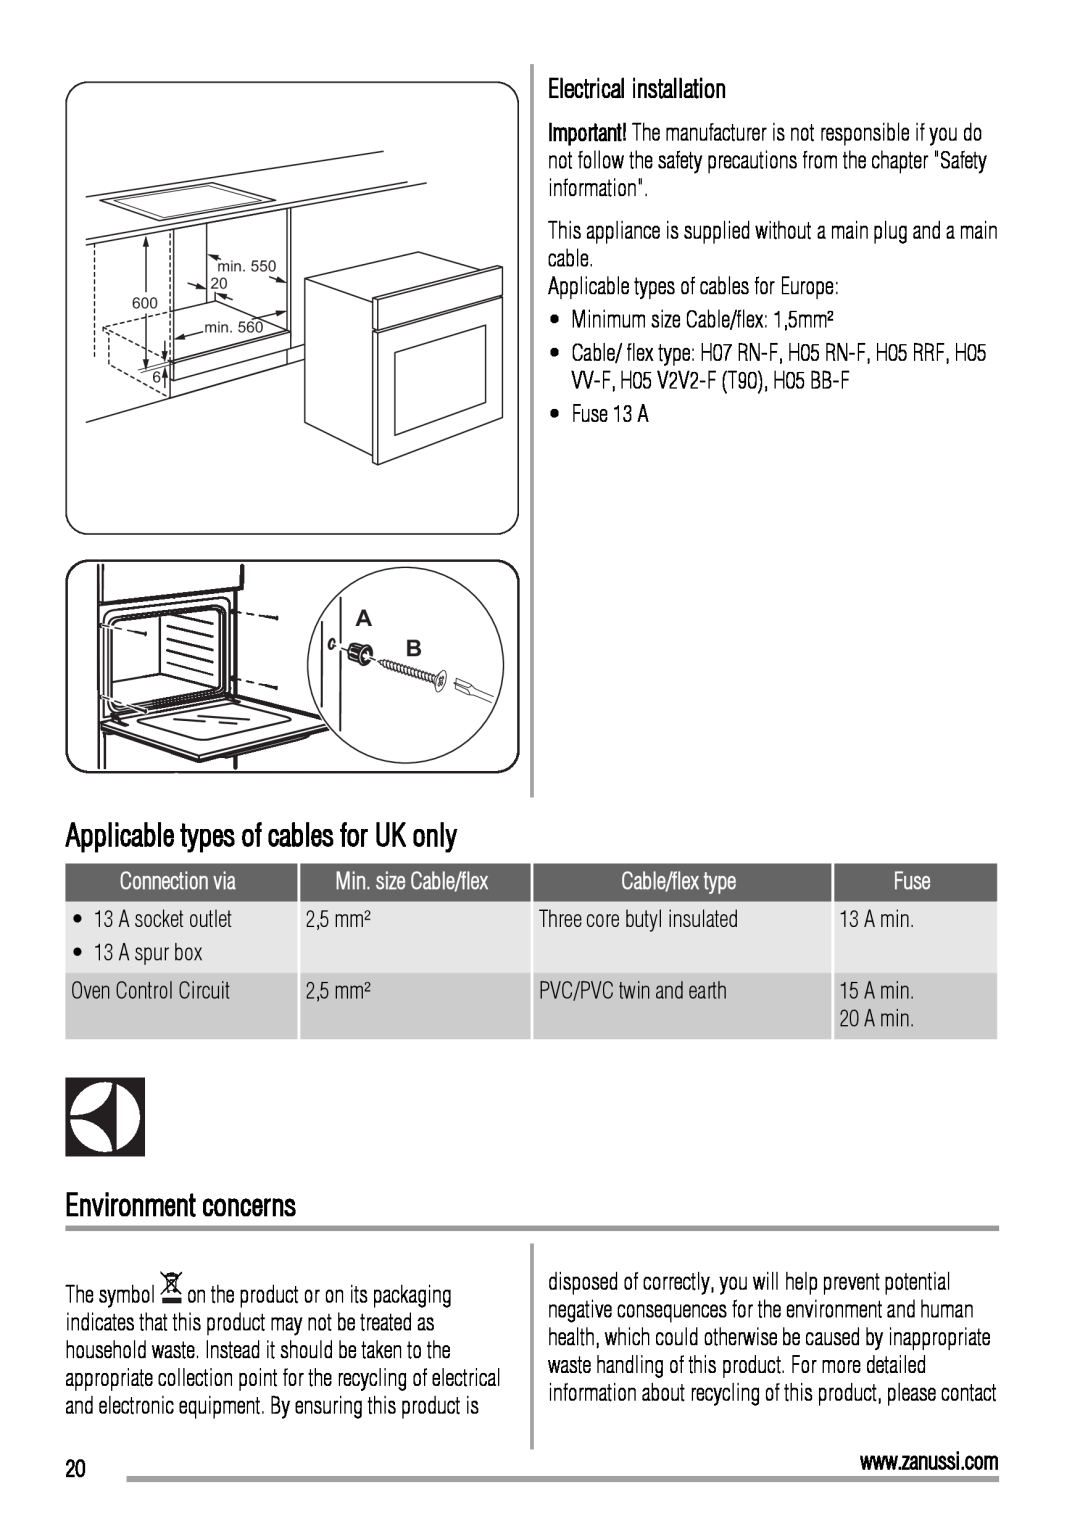 Zanussi ZOP37902 user manual Environment concerns, Electrical installation, Applicable types of cables for UK only 